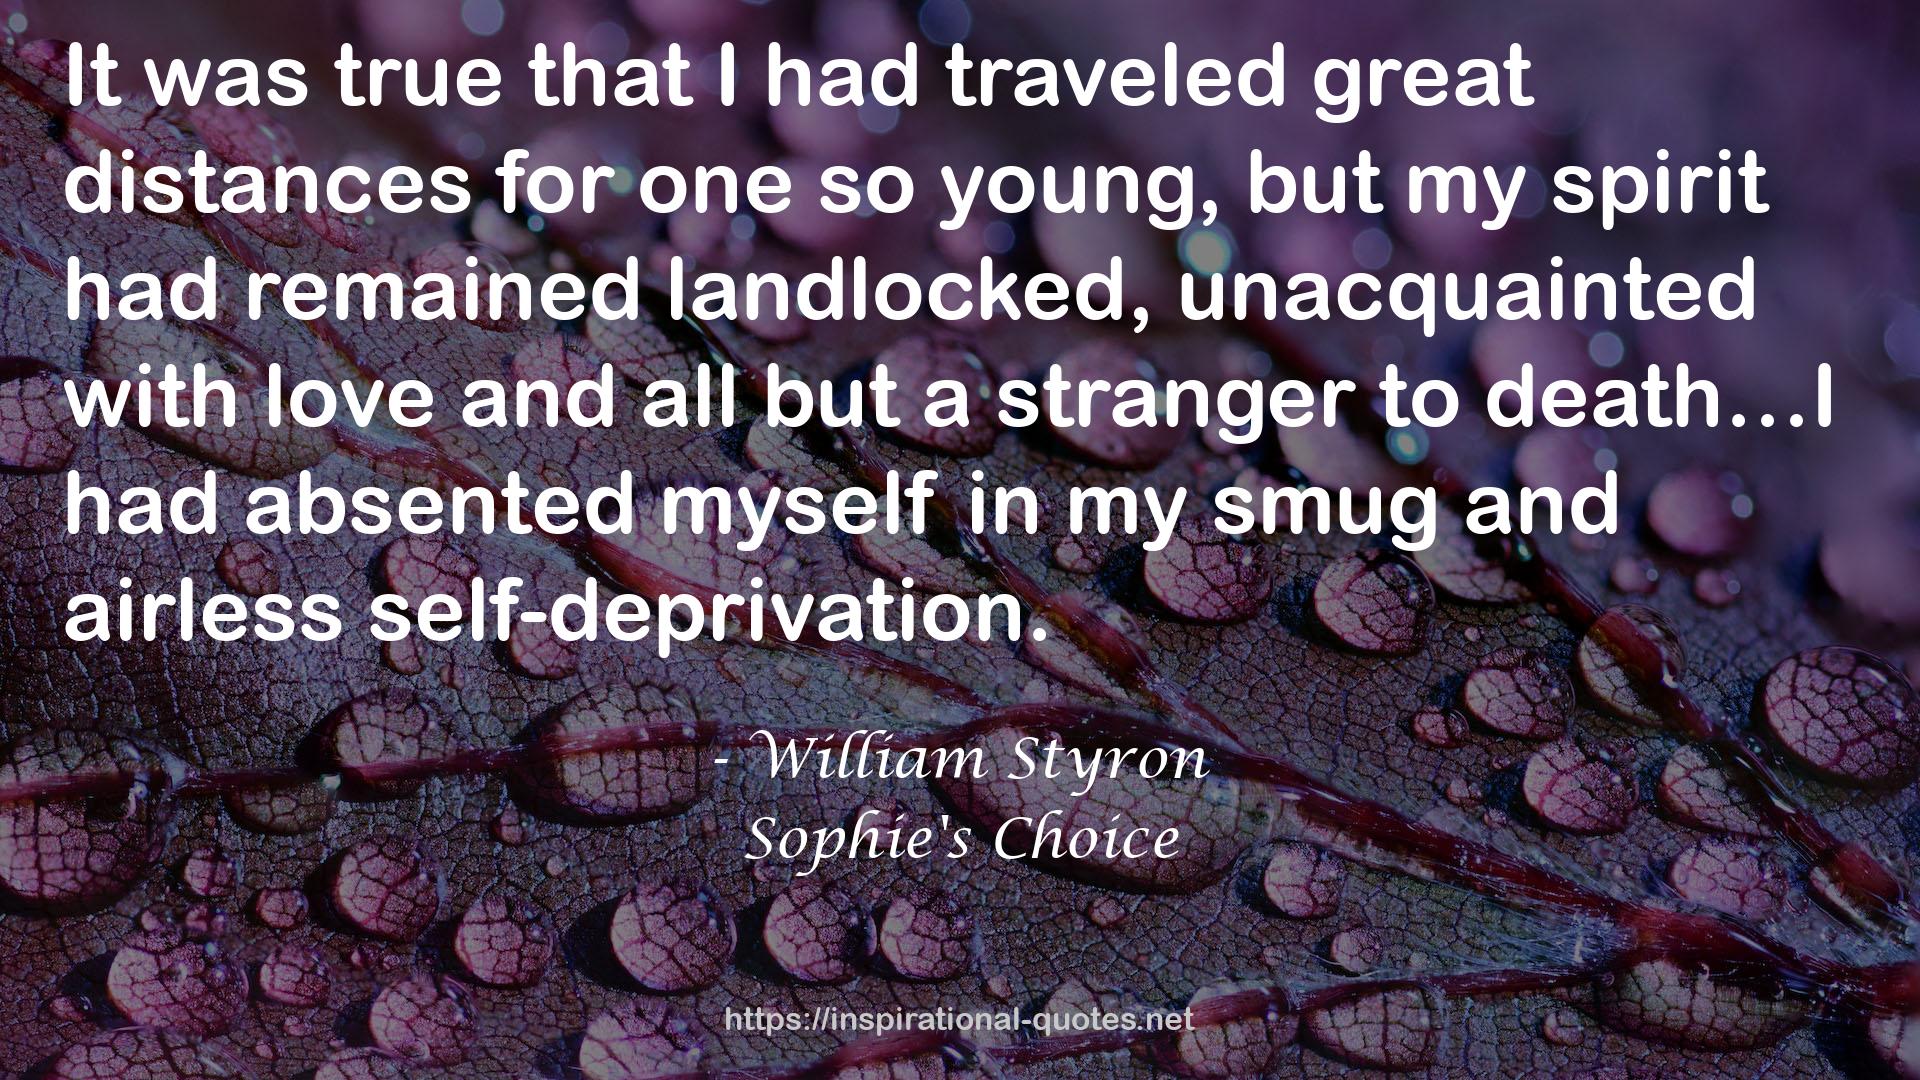 Sophie's Choice QUOTES